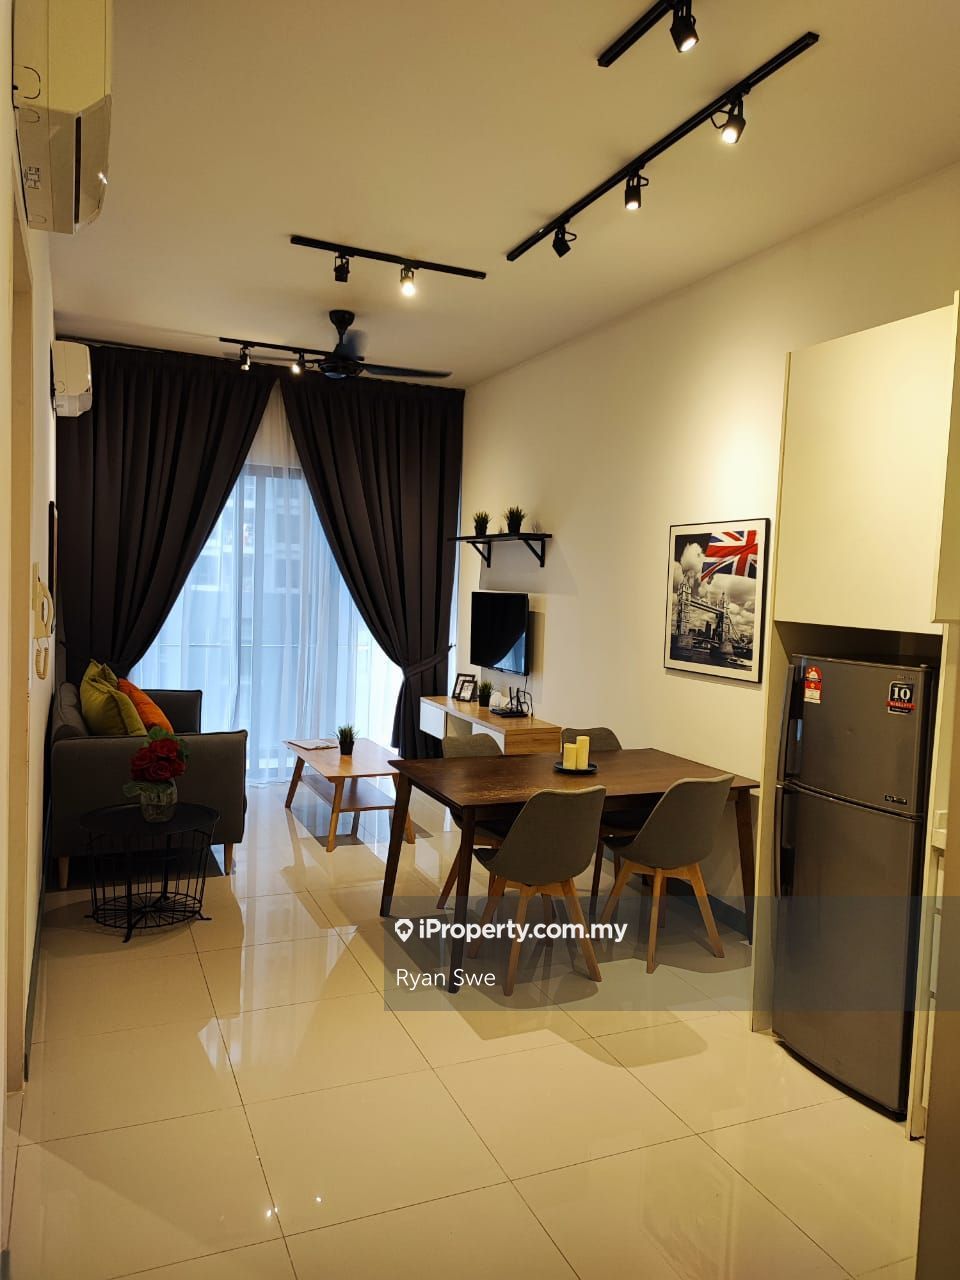 Casa Suite Service Apartment Freehold Below Market Renovated Ss2 Ss17